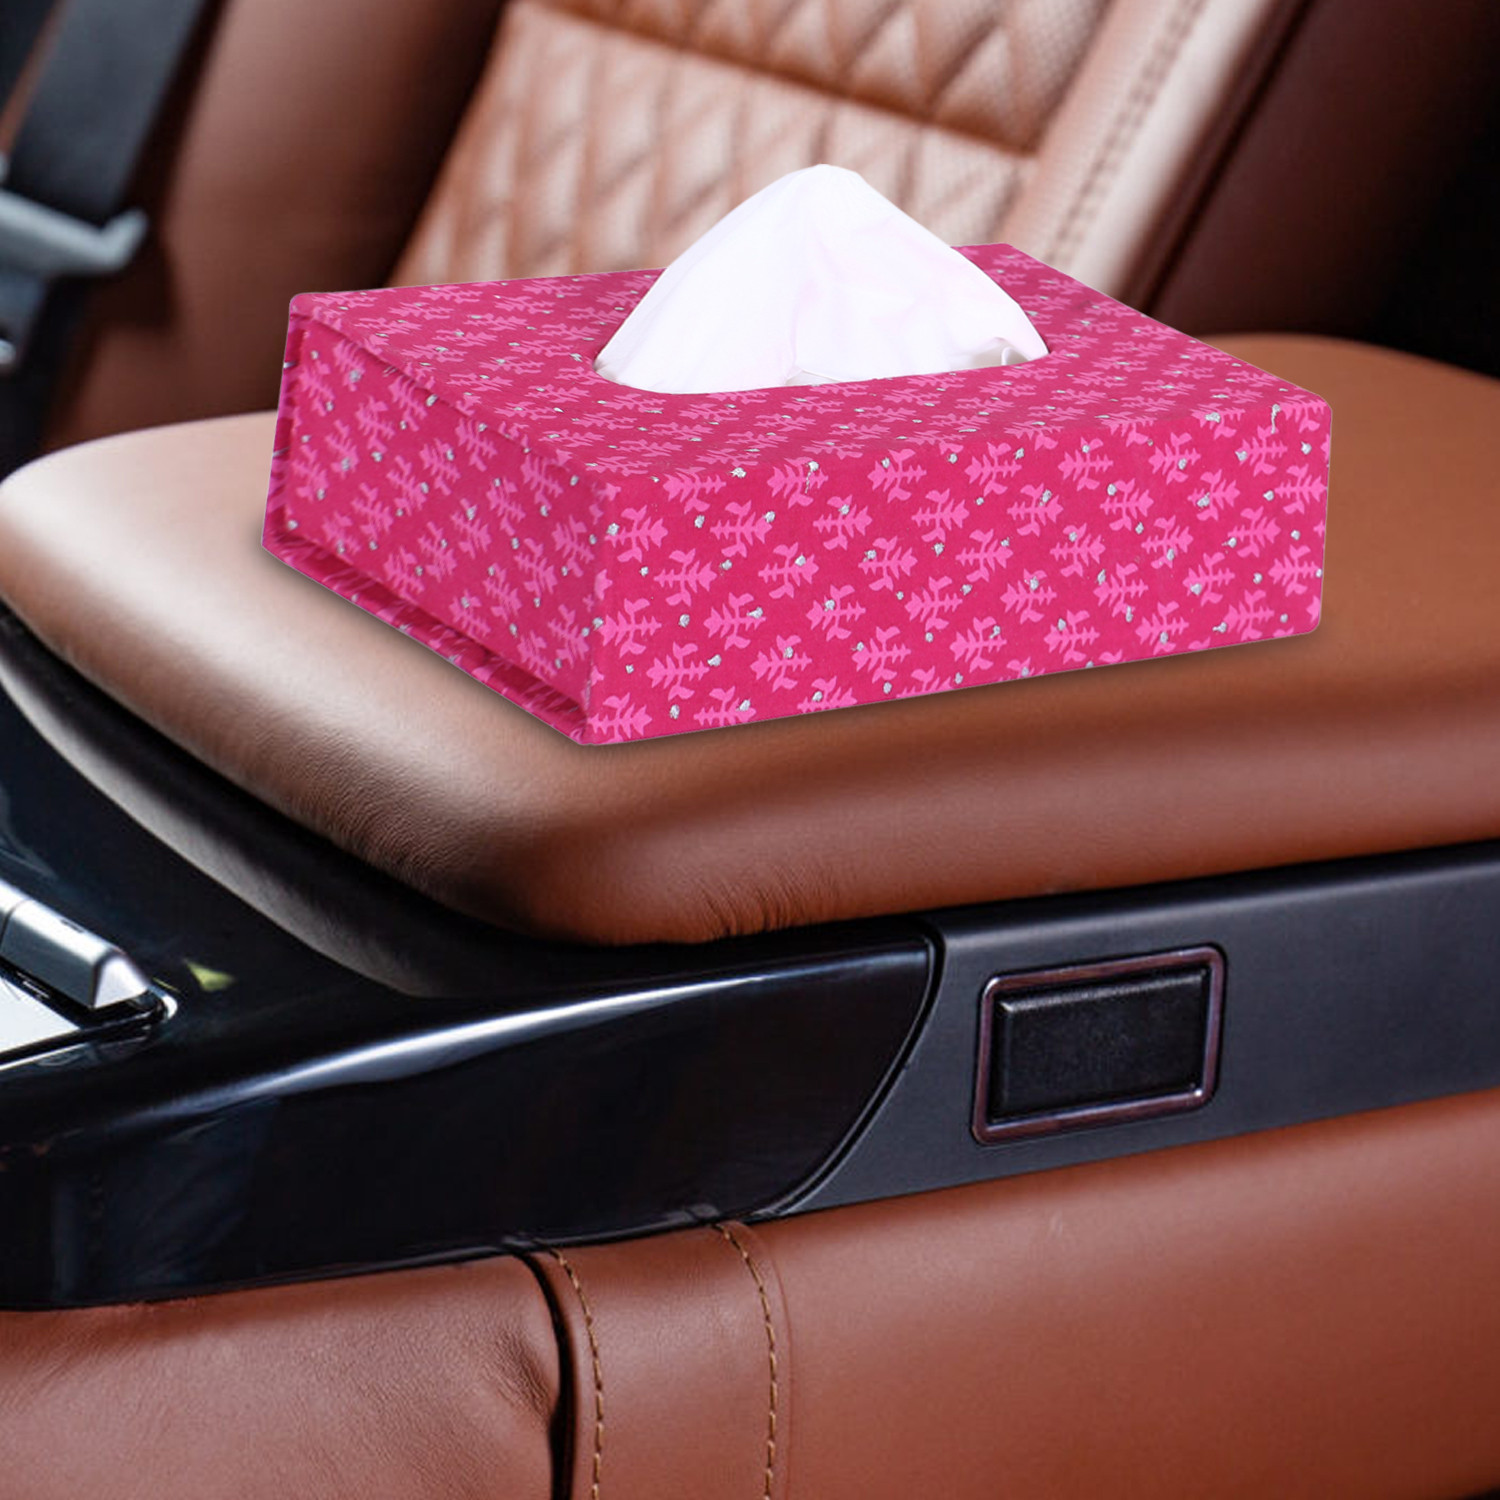 Kuber Industries Tissue Paper Box | Cardboard Tissue Paper Holder | Pink Leaf Tissue Box | Tissue Paper Box for Car | Paper Napkin Holder Hotel | Office | Pink